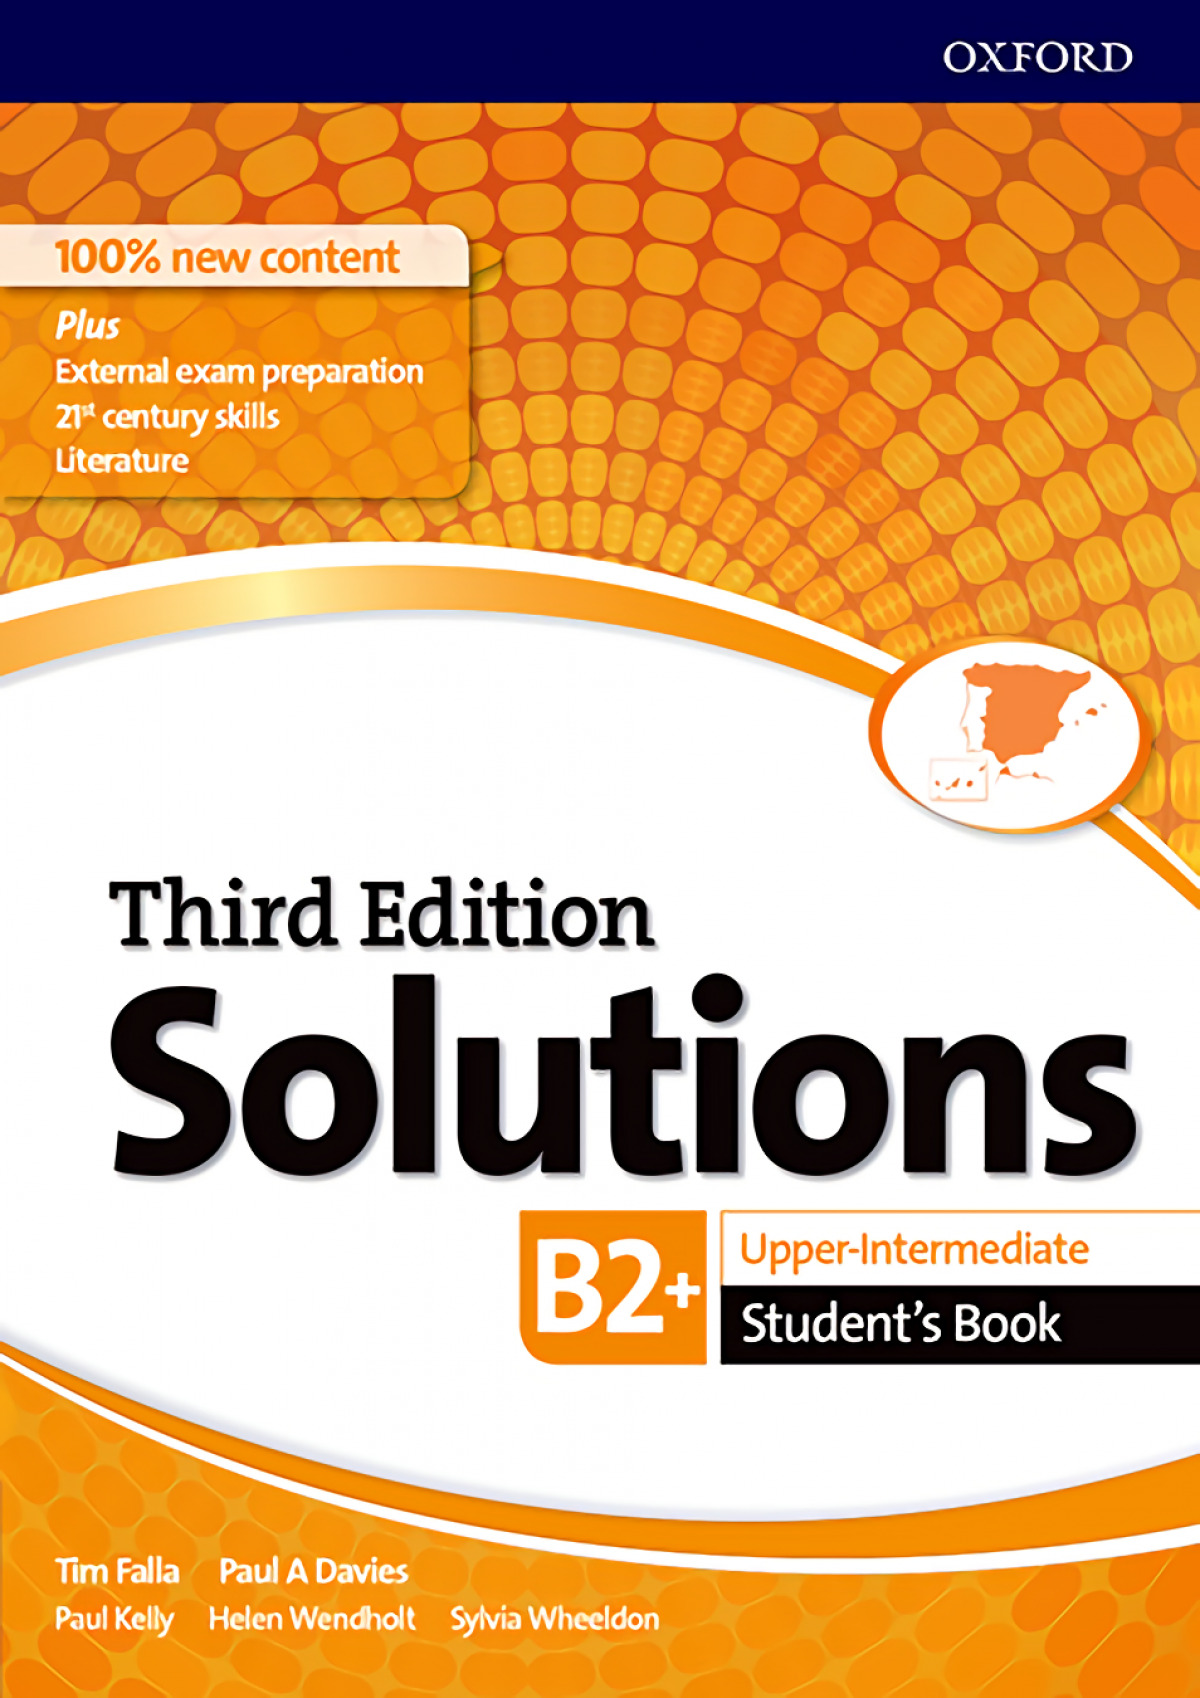 Solutions 3 edition tests. Солюшенс 2nd Edition Upper Intermediate. Солюшенс 3 издание. Oxford solutions 3rd Edition Upper-Intermediate. Solutions Upper Intermediate 3 издание.